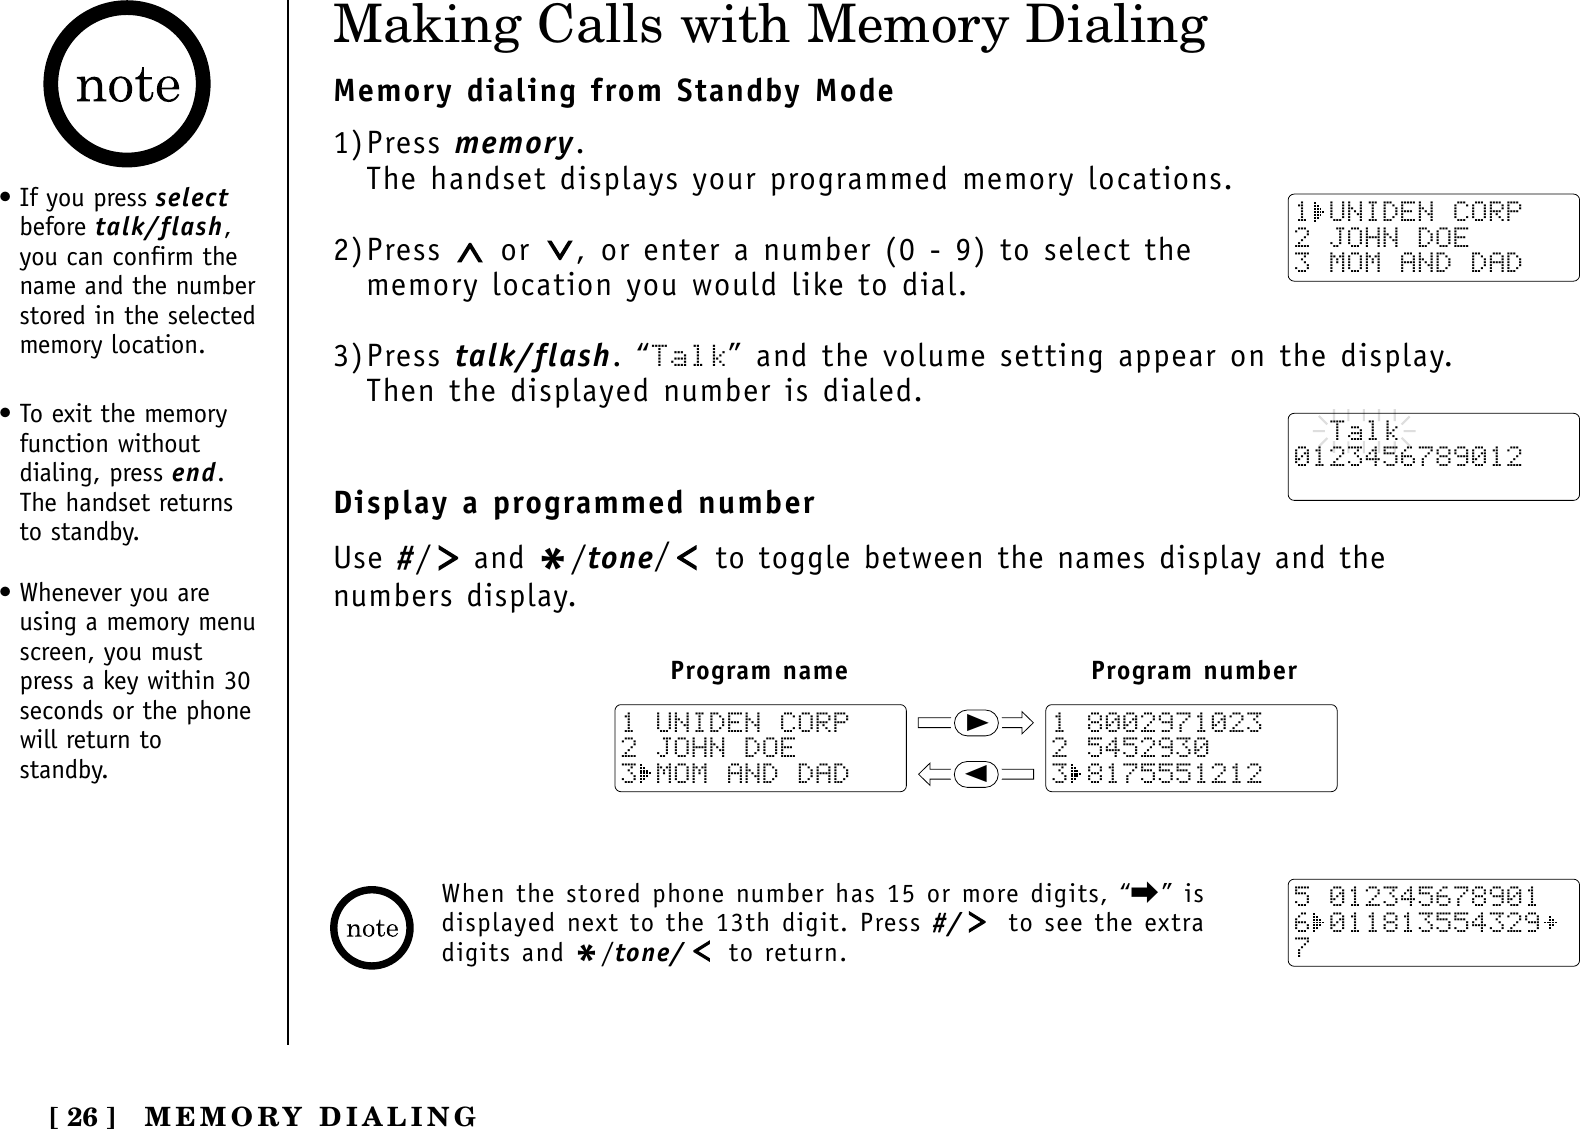 [ 26 ]Making Calls with Memory DialingMemory dialing from Standby Mode1)Press memory.The handset displays your programmed memory locations.2)Press  or  , or enter a number (0 - 9) to select thememory location you would like to dial.3)Press talk/flash. “Talk” and the volume setting appear on the display. Then the displayed number is dialed.Display a programmed numberUse #/and */tone/to toggle between the names display and the numbers display.1 UNIDEN CORP2 JOHN DOE3 MOM AND DAD  Talk0123456789012Program name Program number111 80029710232 54529303 81755512121 UNIDEN CORP2 JOHN DOE3 MOM AND DAD5 0123456789016 0118135543297When the stored phone number has 15 or more digits, “\” isdisplayed next to the 13th digit. Press #/ to see the extradigits and */tone/ to return.• If you press selectbefore talk/flash,you can confirm thename and the numberstored in the selectedmemory location.• To exit the memoryfunction withoutdialing, press end.The handset returnsto standby.• Whenever you areusing a memory menuscreen, you mustpress a key within 30seconds or the phonewill return tostandby.MEMORY DIALING